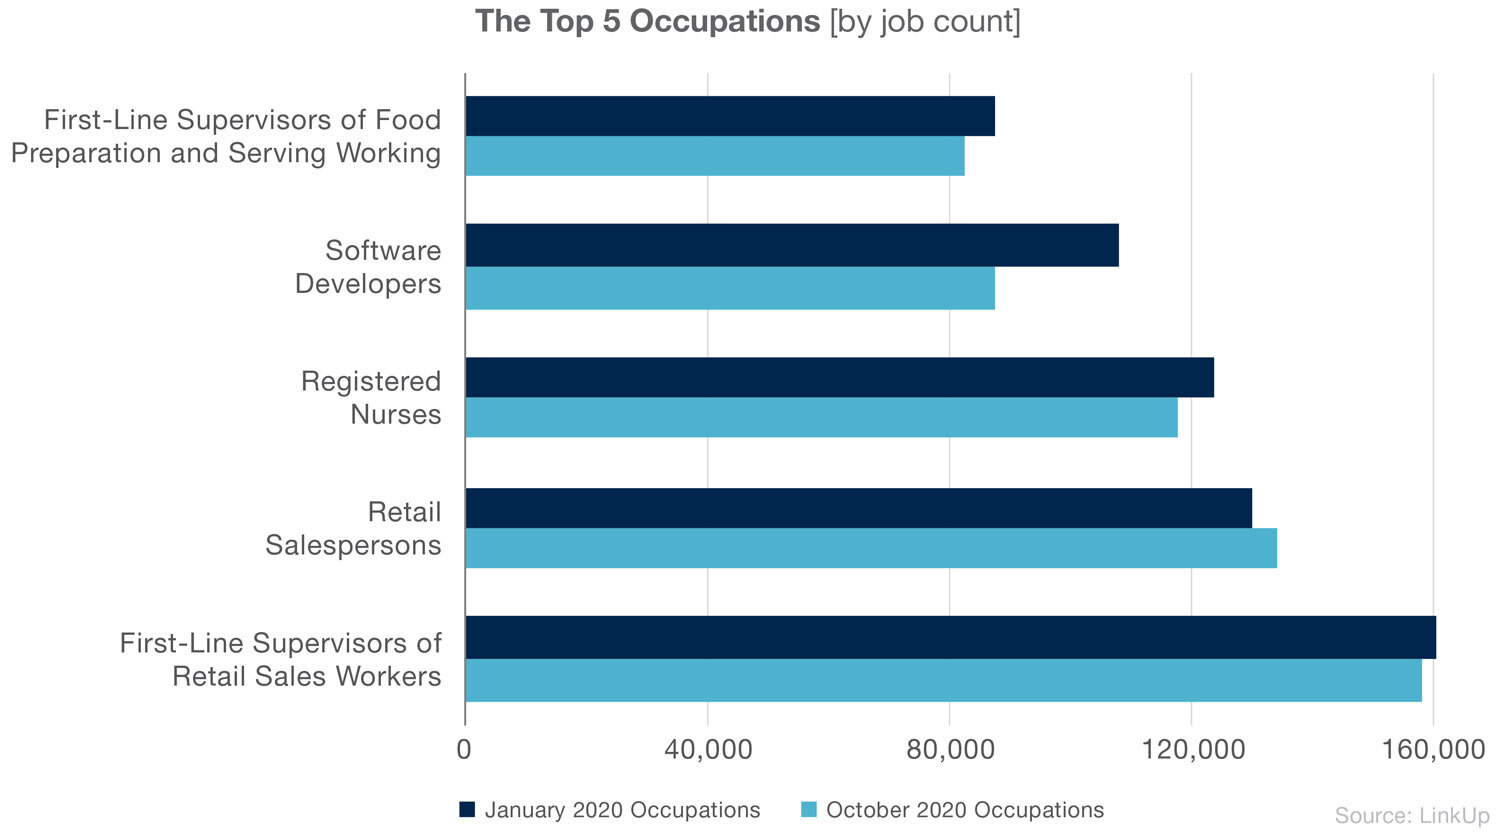 The top 5 occupations in 2020